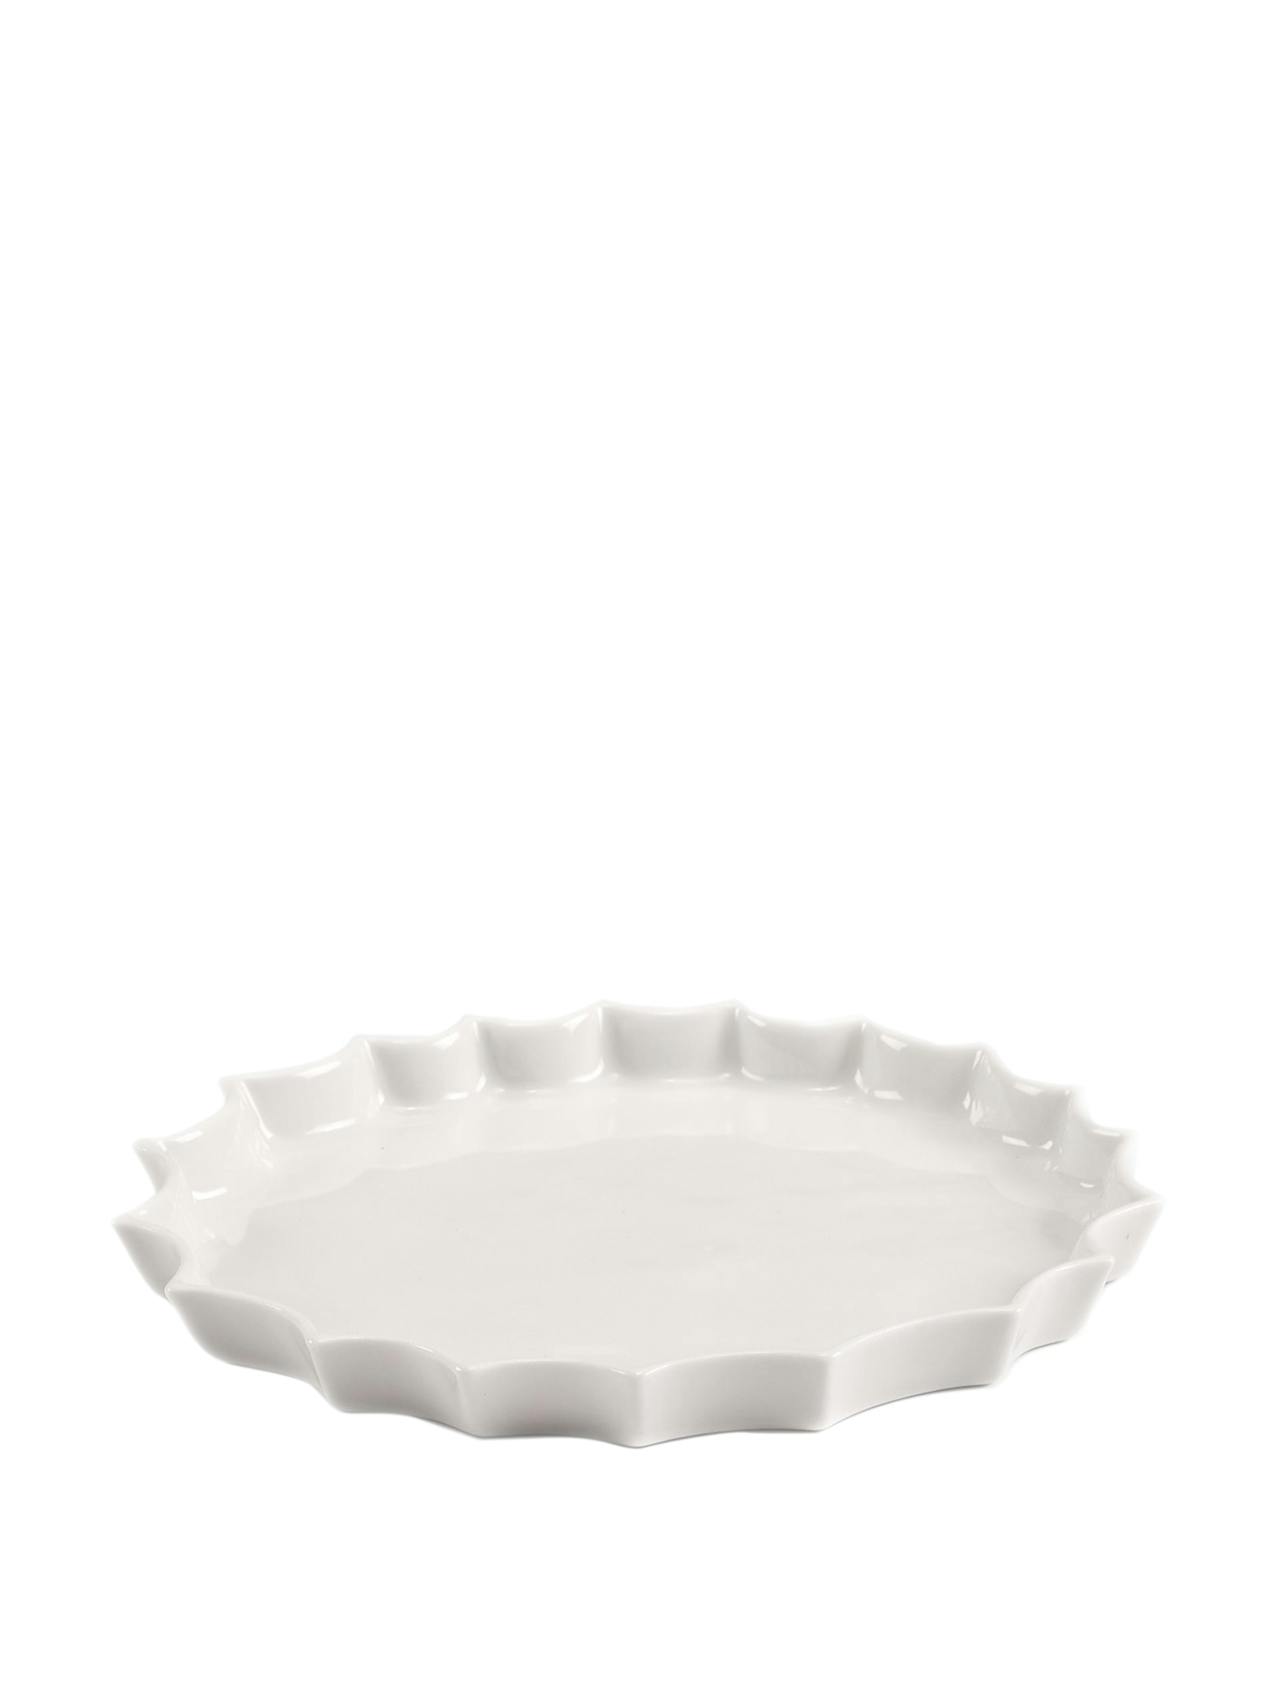 Looking sharp, this The Sette plate makes an unexpected table accent that guests will love. Collagerie.com